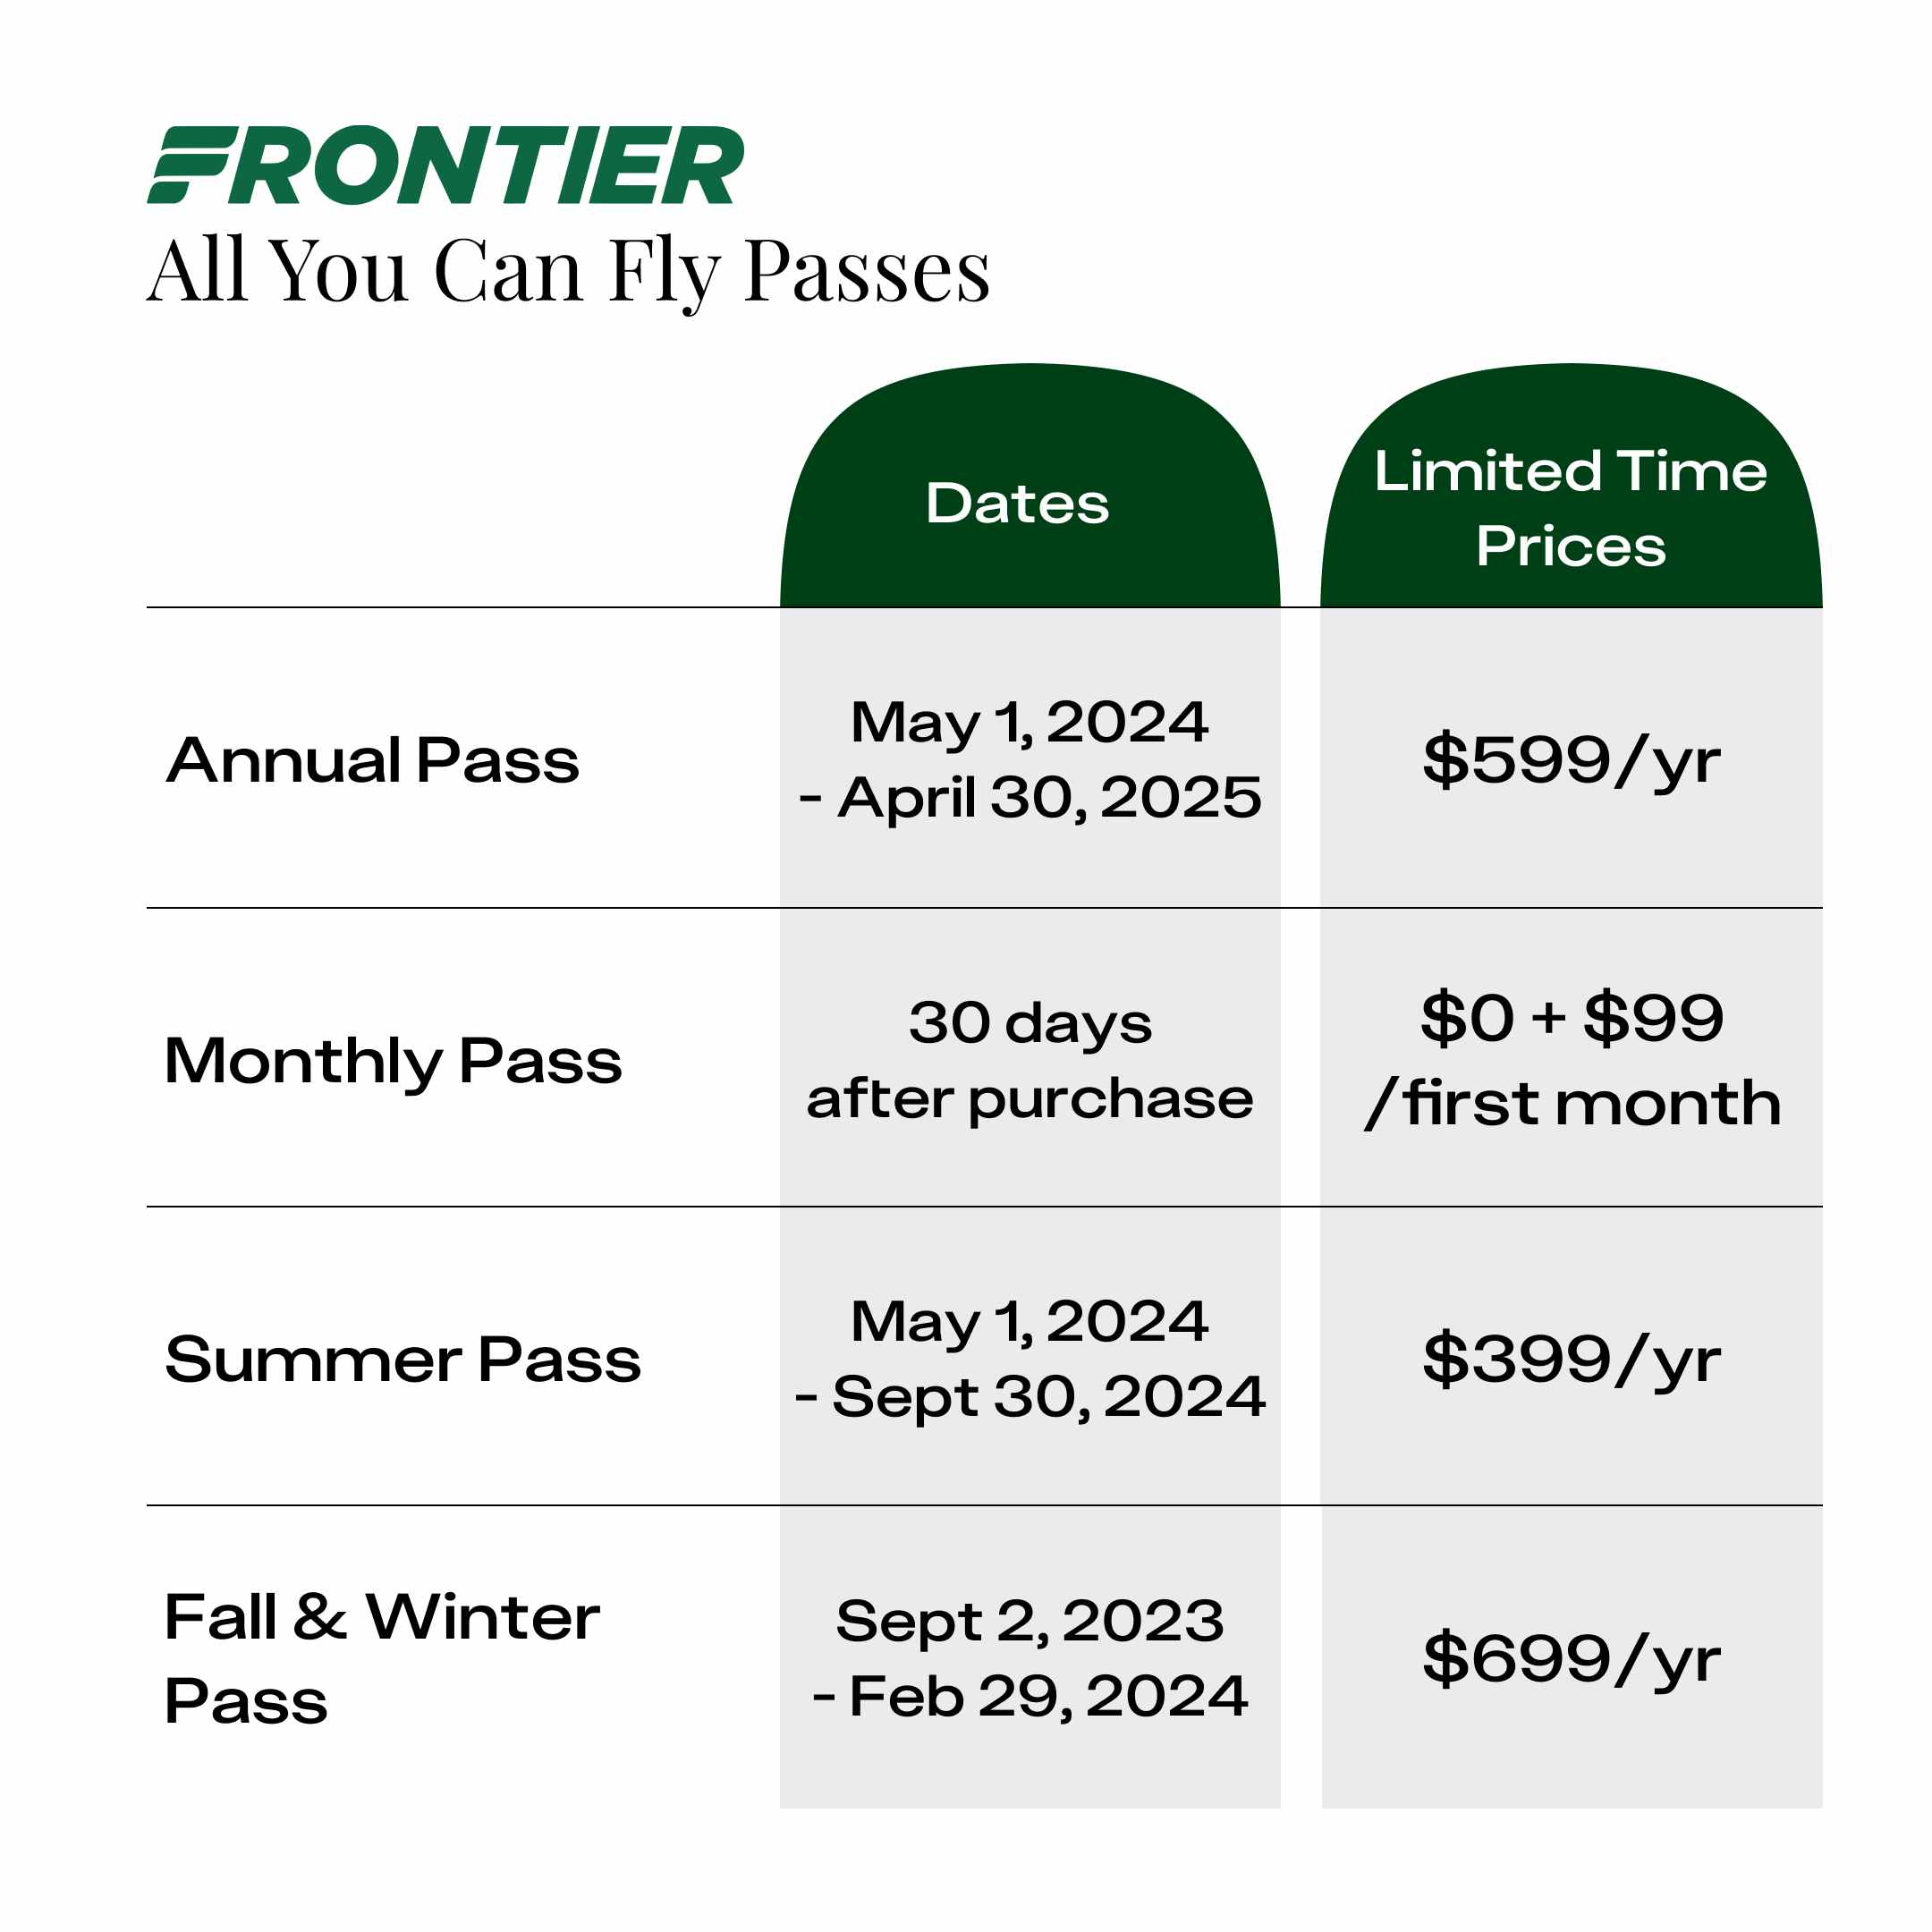 Frontier Airlines All You Can Fly Passes and their prices for 2024.